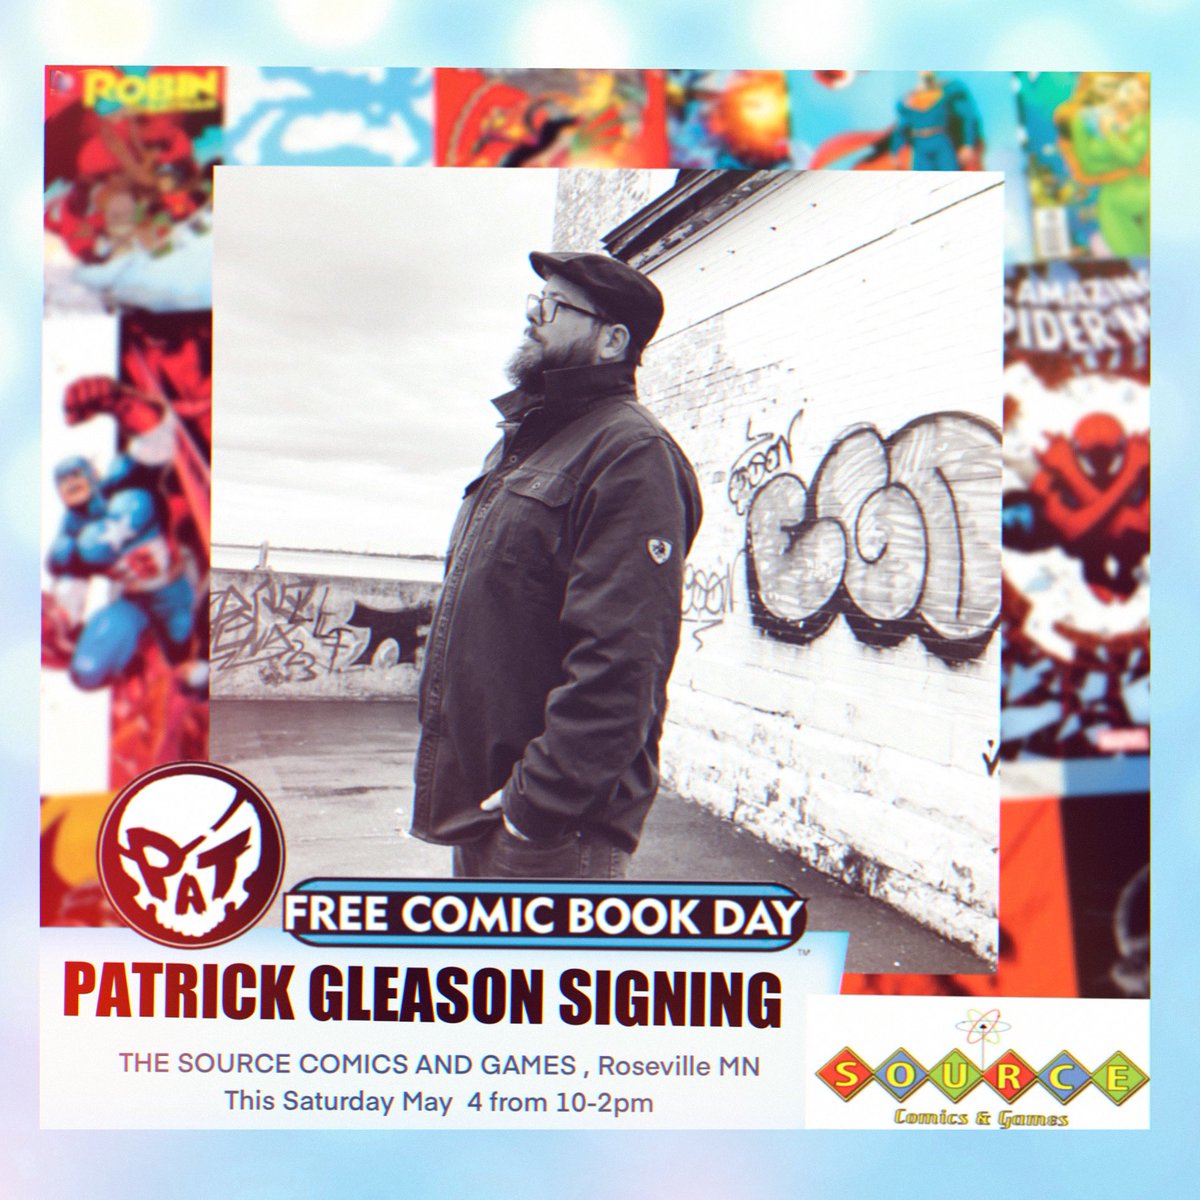 @patrick_gleason will be signing this Saturday for Free Comic Book Day! Be sure and check out your Local Comic Shop join in the fun! Tell a friend and follow for more 🤙 #patrickgleason #freecomicbookday #marvel #dc #image #comics #artist #signing